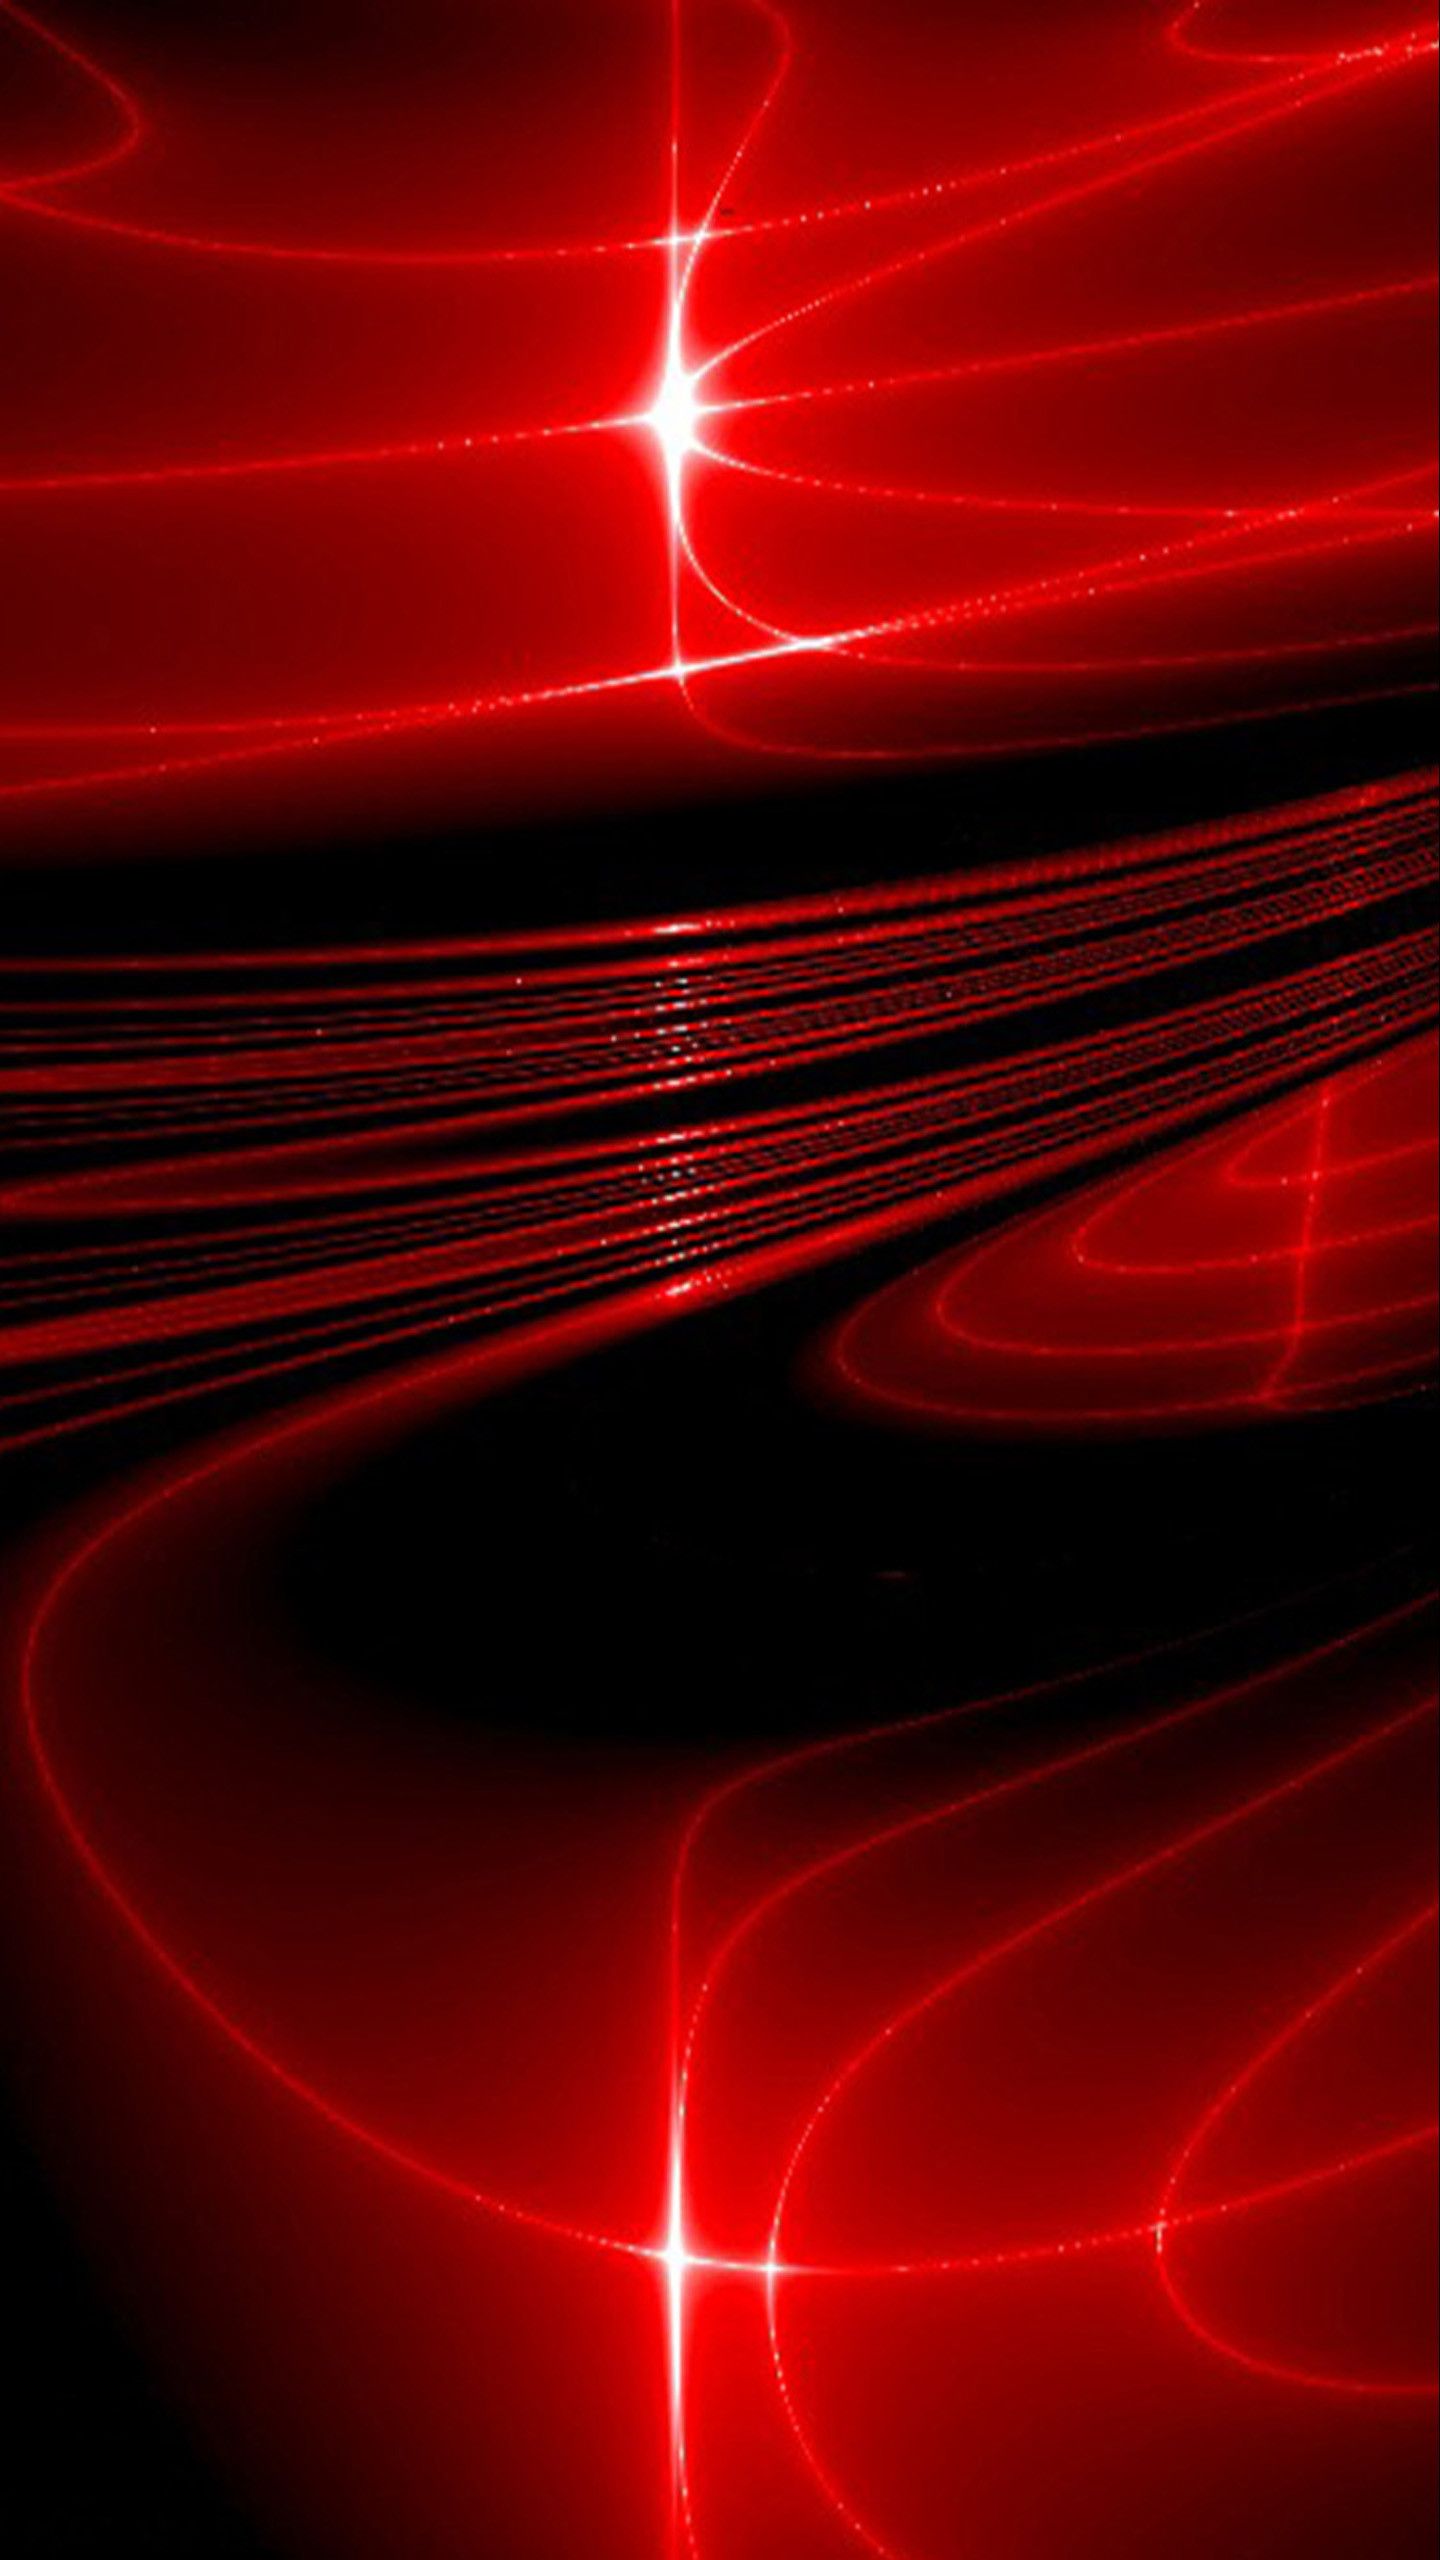 Red Galaxy Wallpapers - 4k, HD Red Galaxy Backgrounds on WallpaperBat